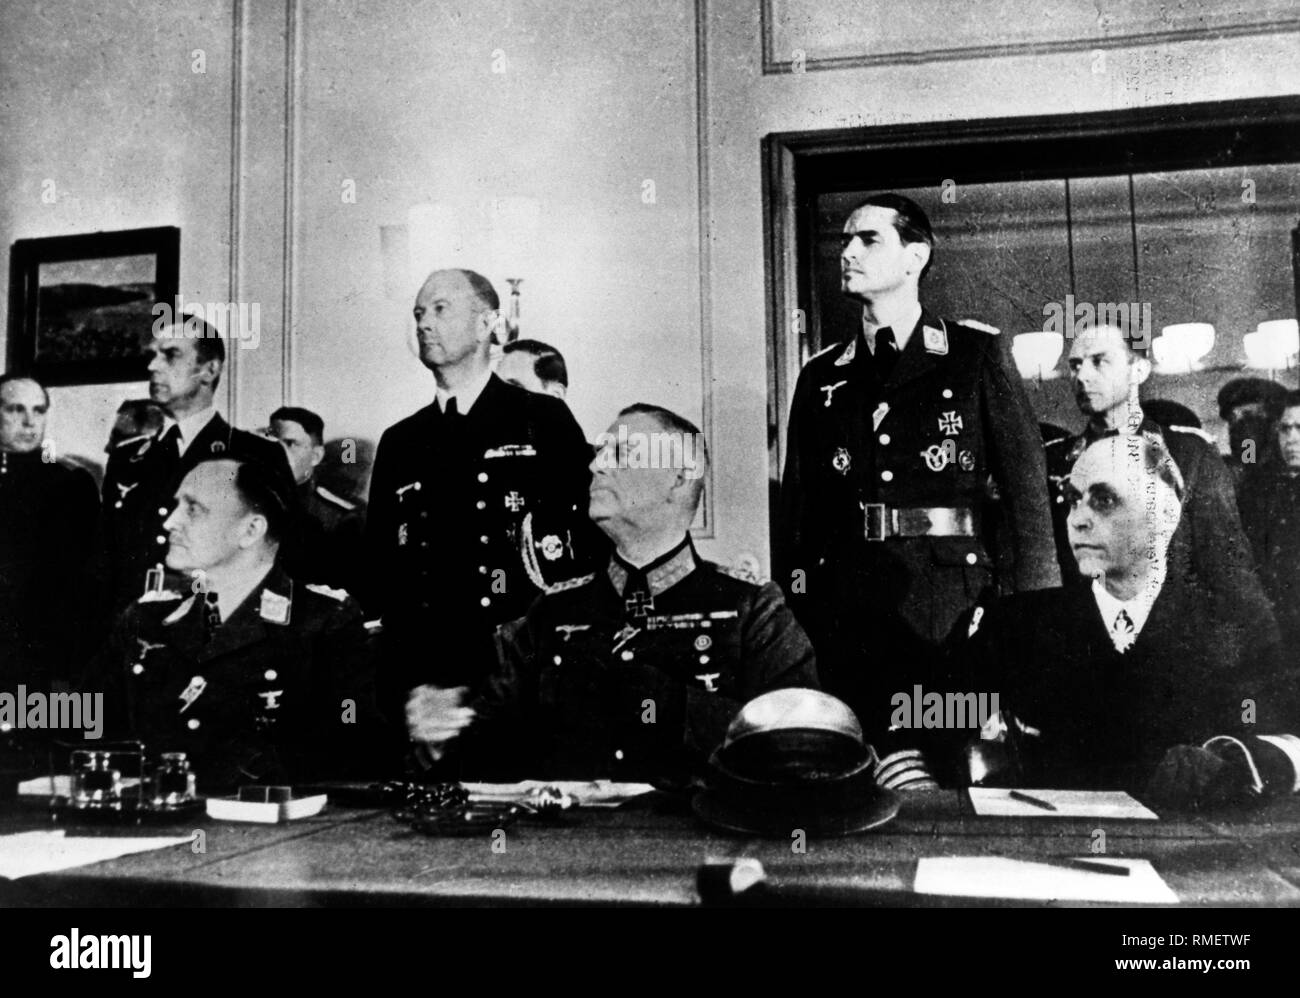 General Hans-Juergen Stumpff, Field Marshal General Wilhelm Keitel and Admiral Hans-Georg von Friedeburg listen to the speech of the Soviet Marshal Schukow during the formal capitulation in Berlin Karlshorst on the 09th of May, 1945. Stock Photo